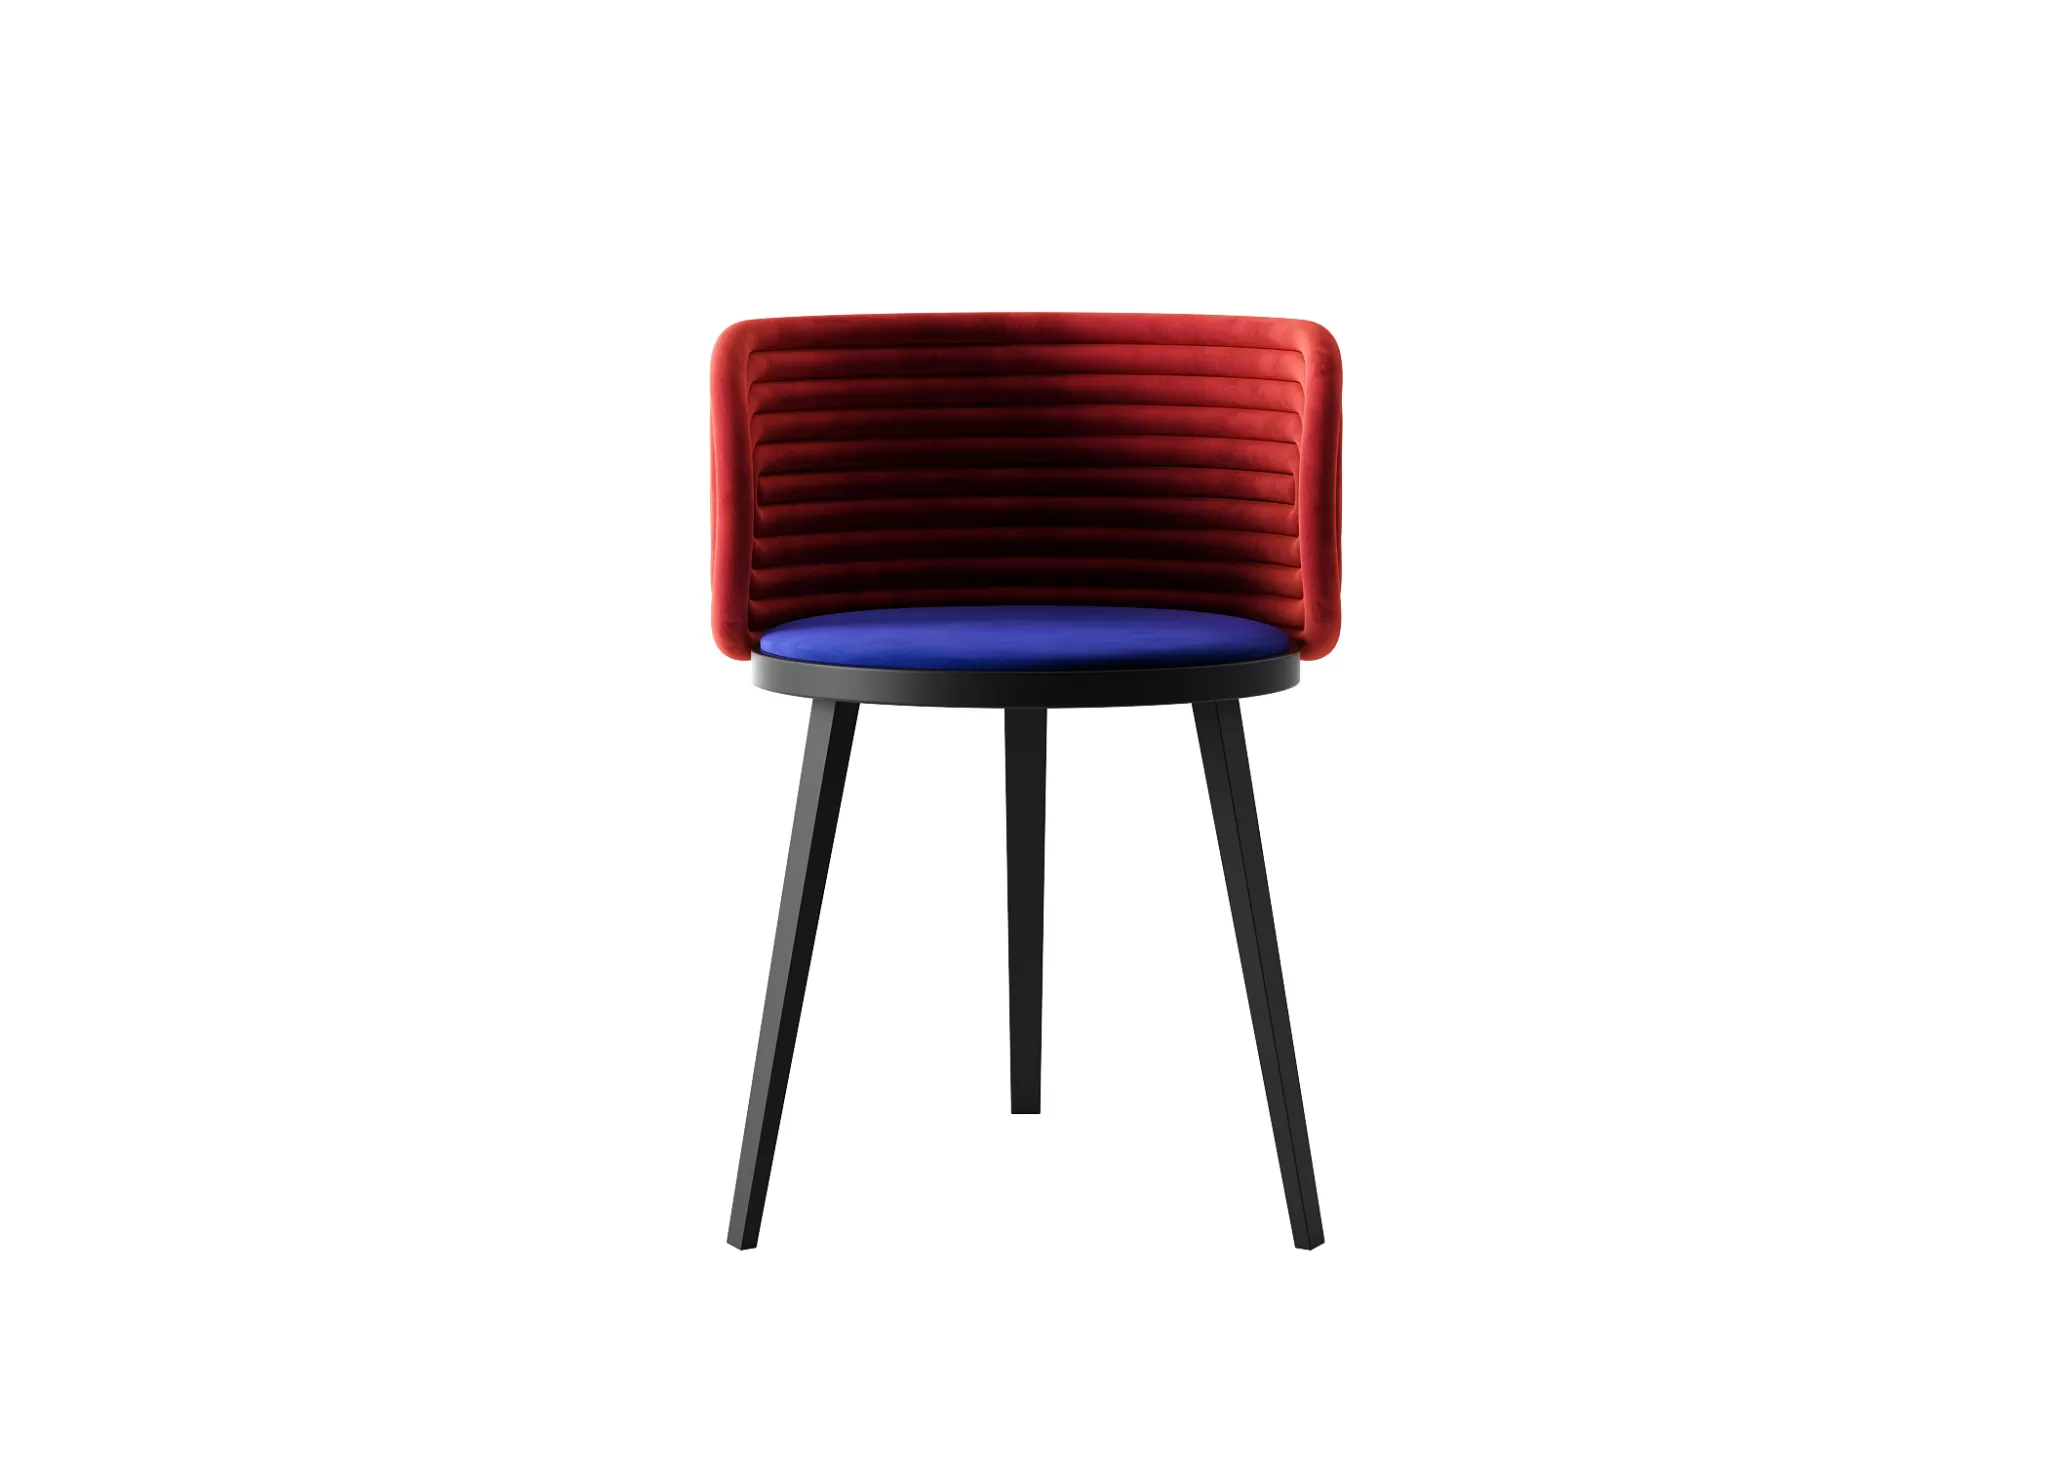 FURNITURE 3D MODELS – CHAIRS – 0098